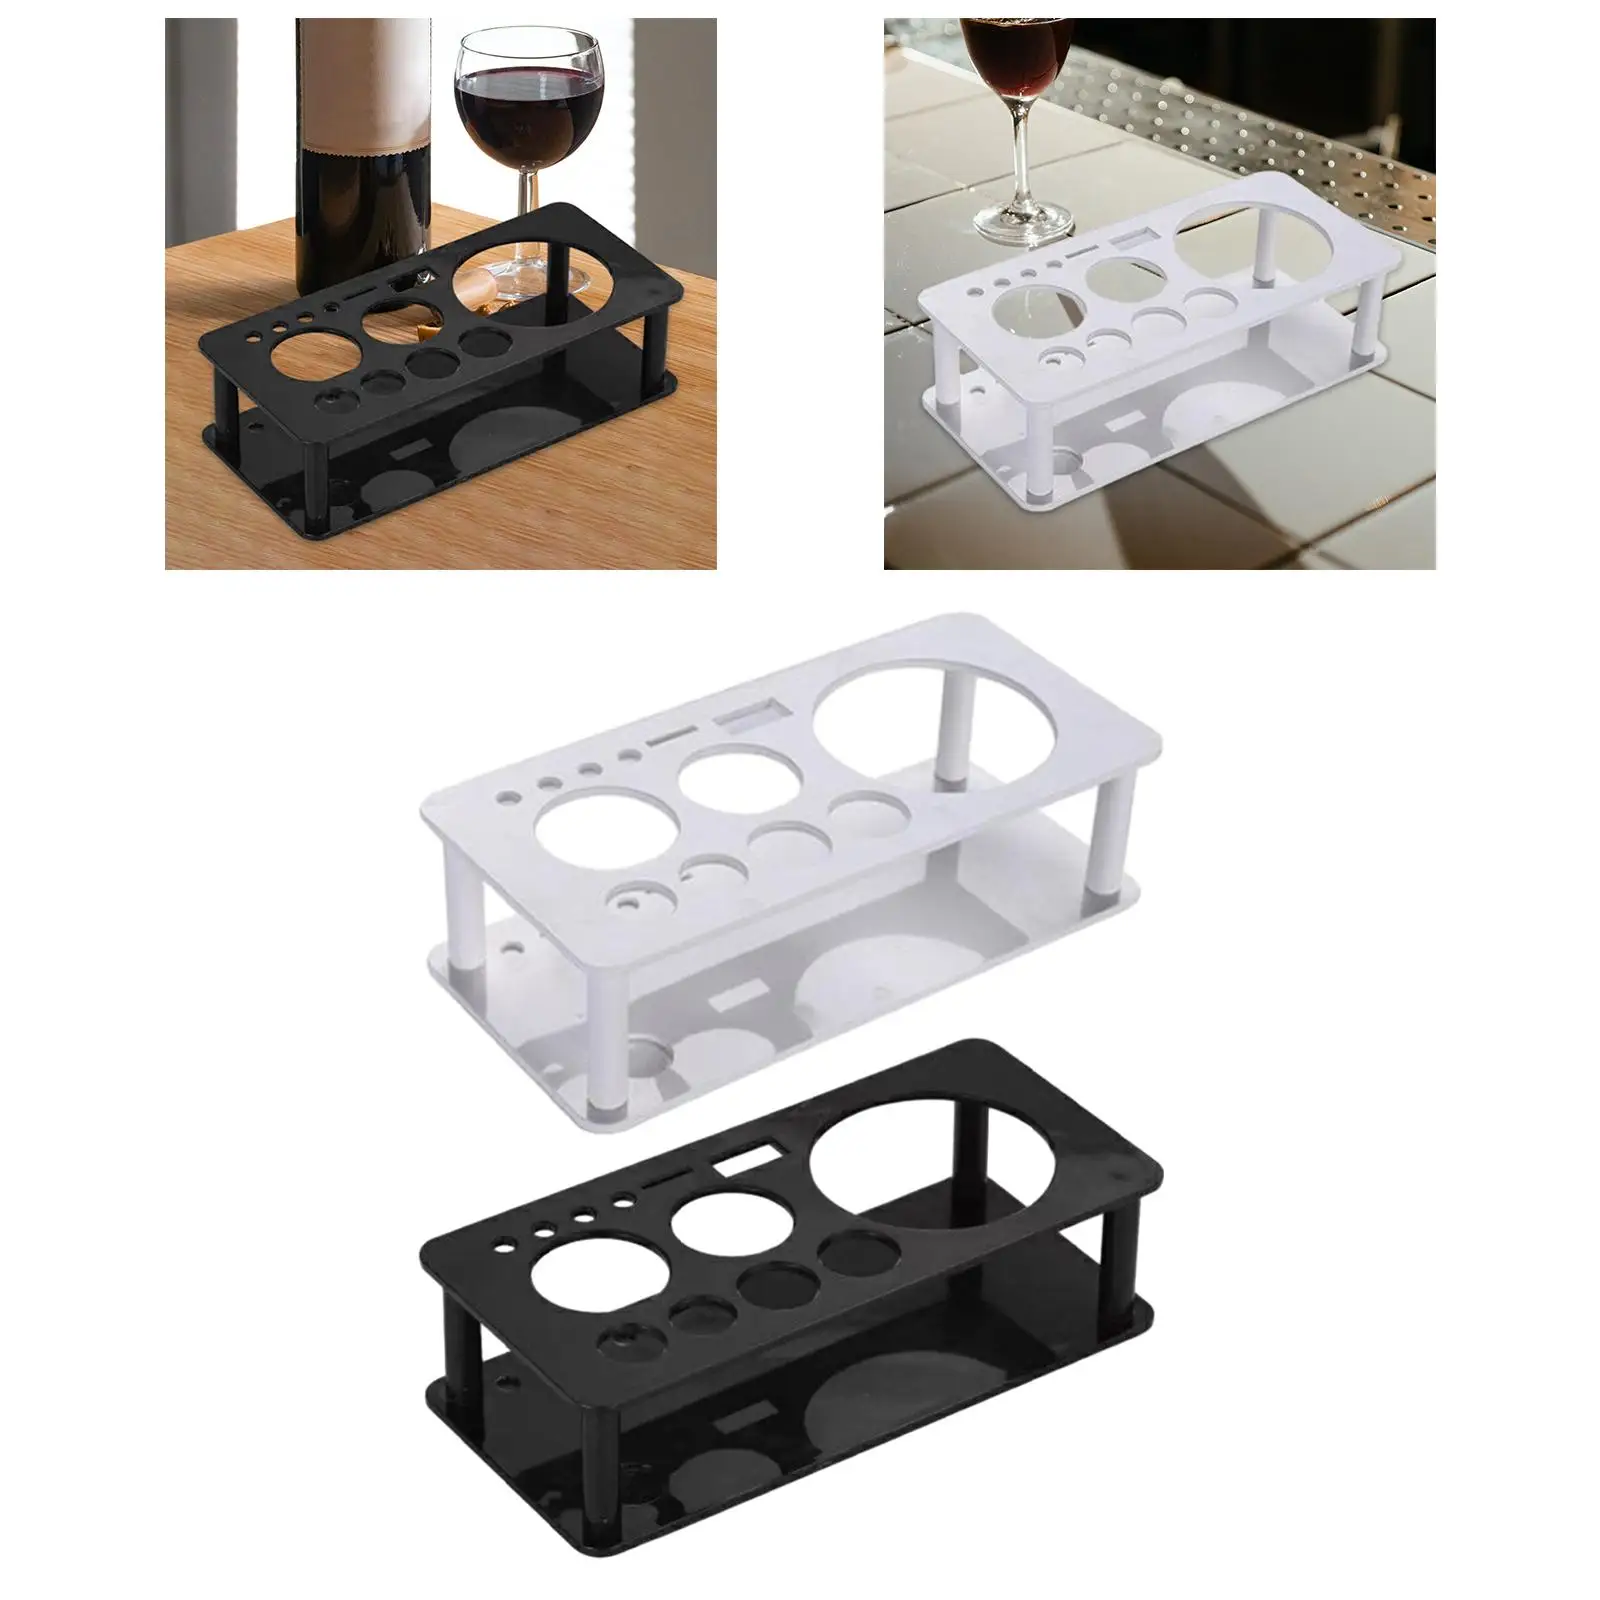 Bartender Kits Storage Stand Durable Accessories Professional Cocktail Shaker Stand for Bar Beginners Party Cocktail